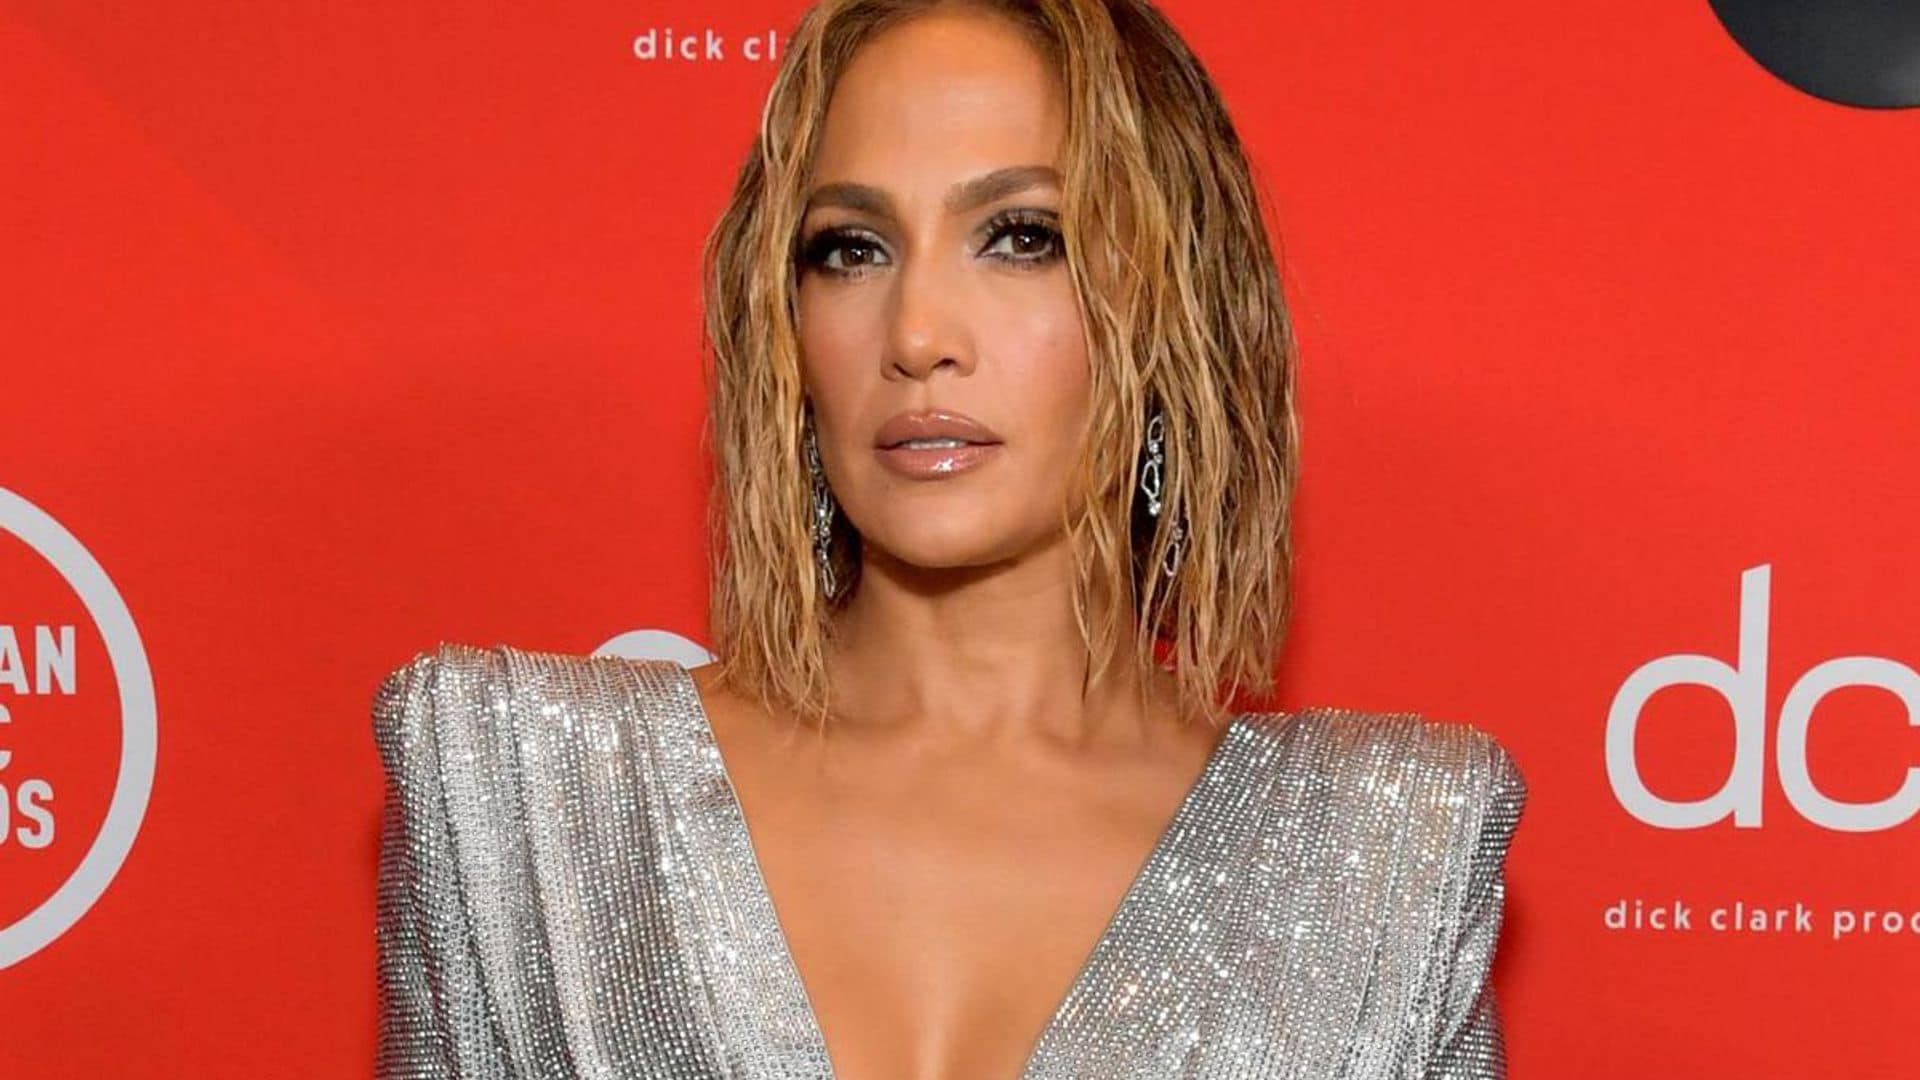 Jennifer Lopez goes fully nude for her new music cover art